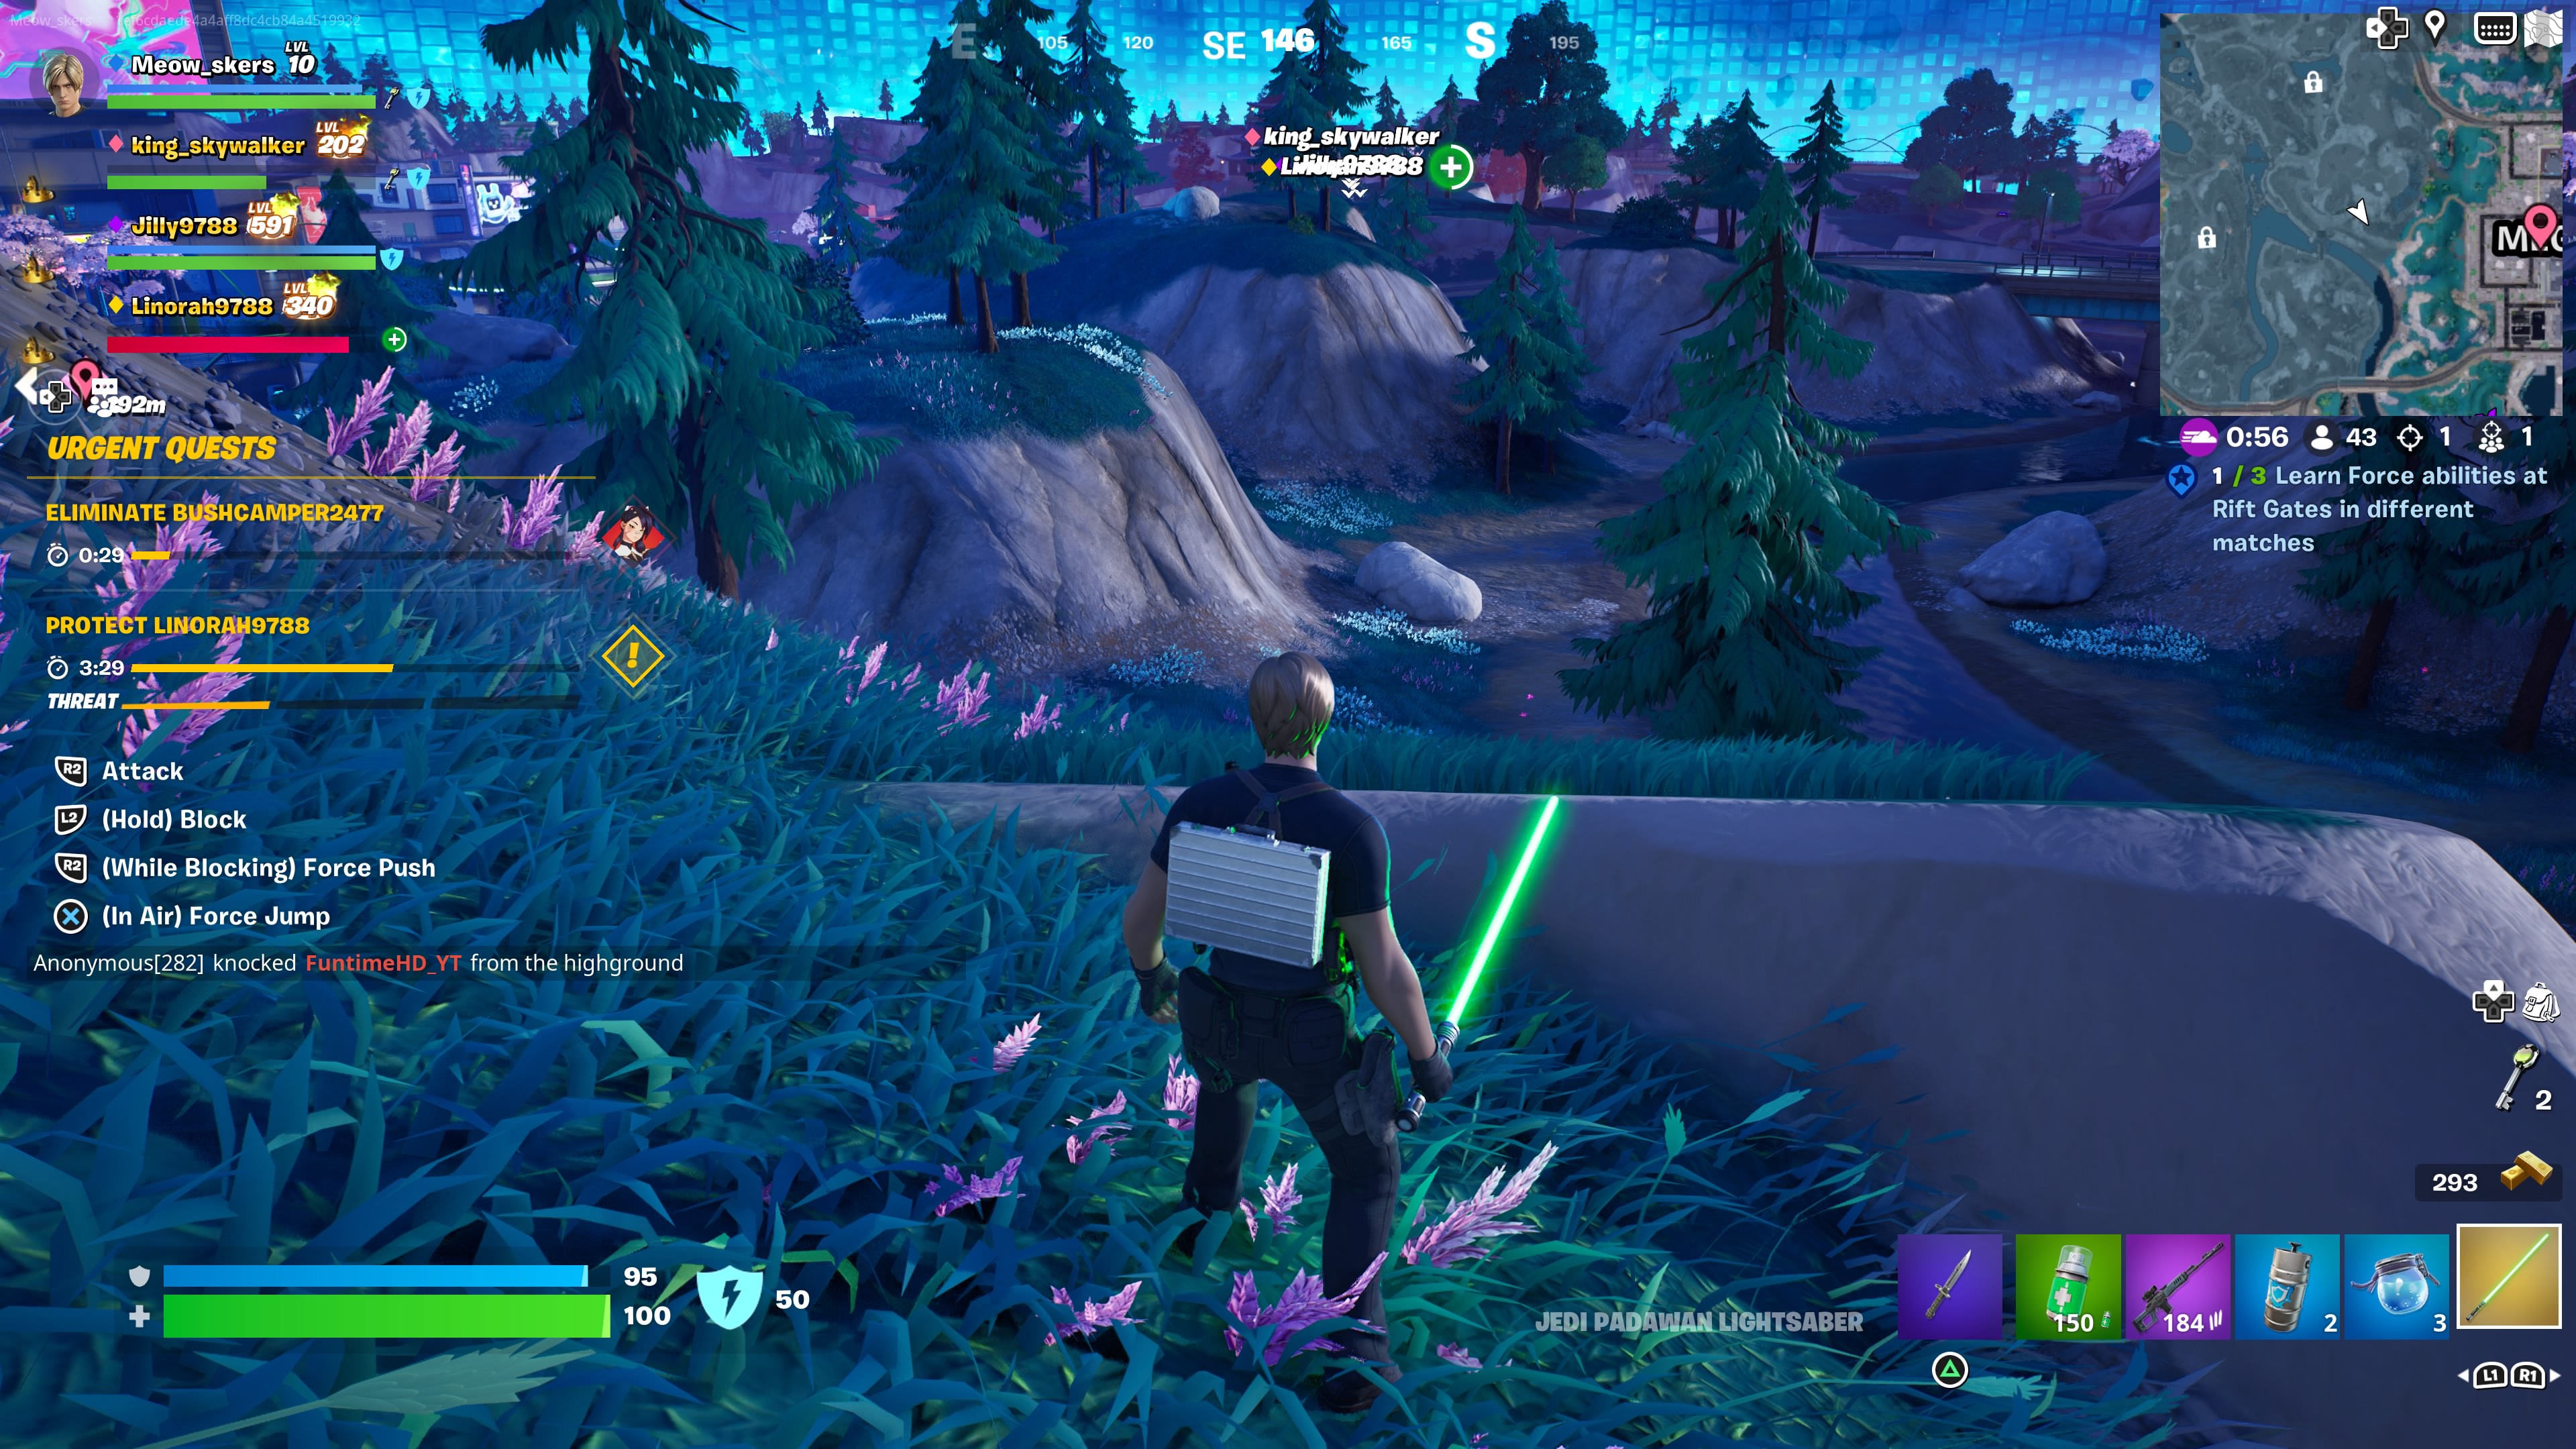 Character with lightsaber in Fortnite.